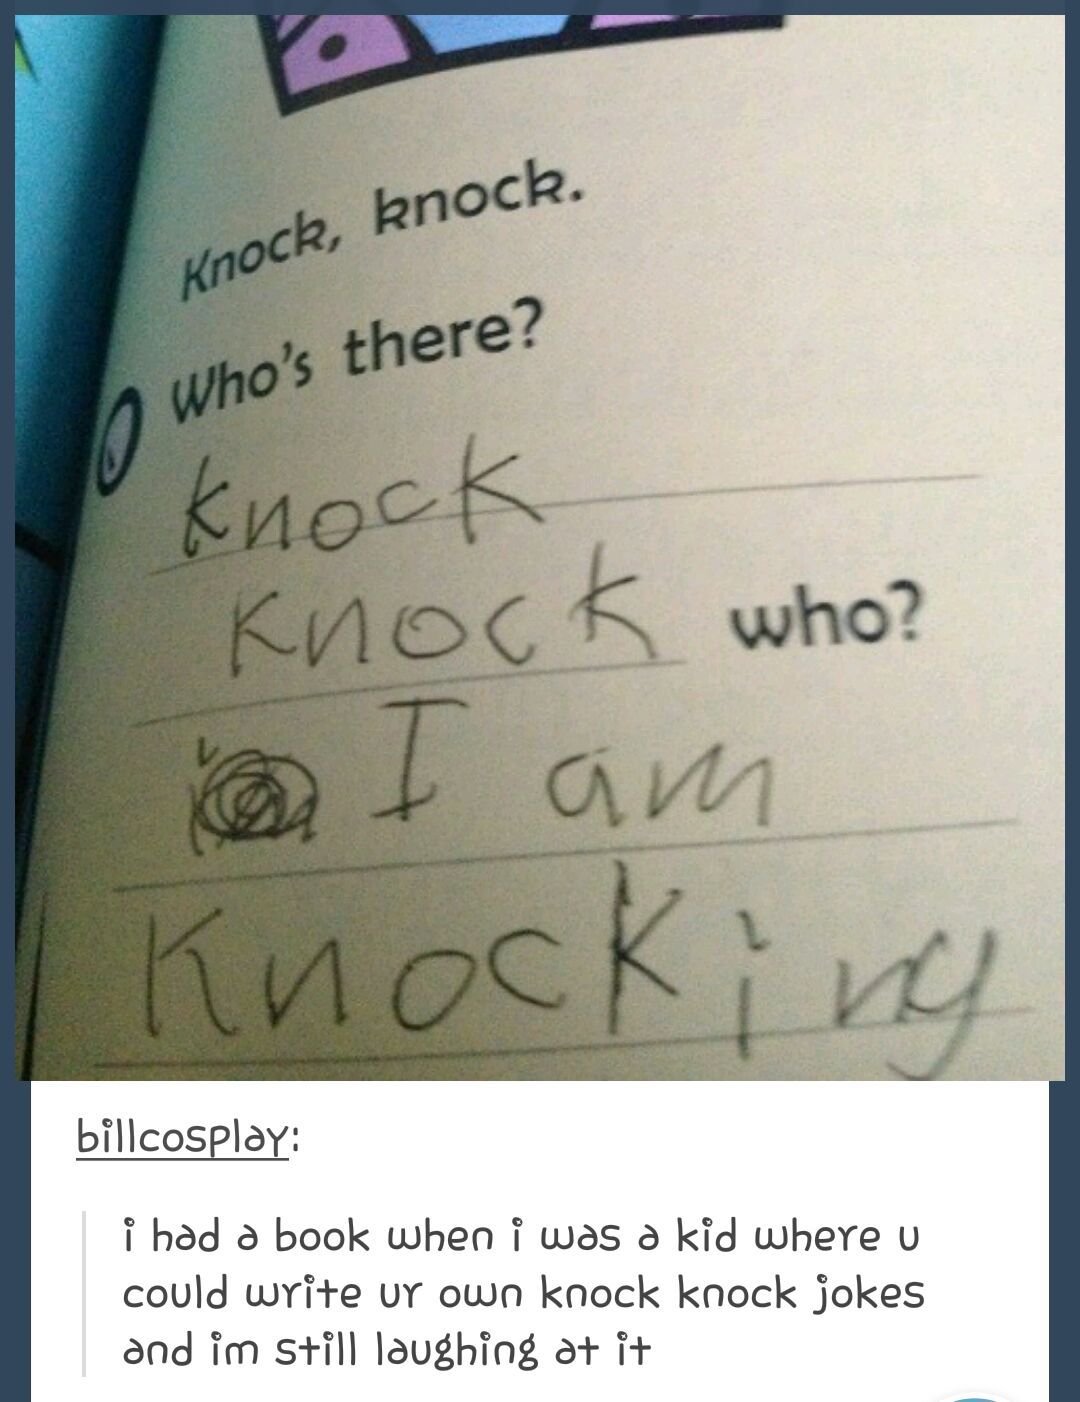 handwriting - Knock, knock. Who's there? knock Knock who? I am Knocking billcosplay i had a book when I was a kid where u could write ur own knock knock jokes and im still laughing at it